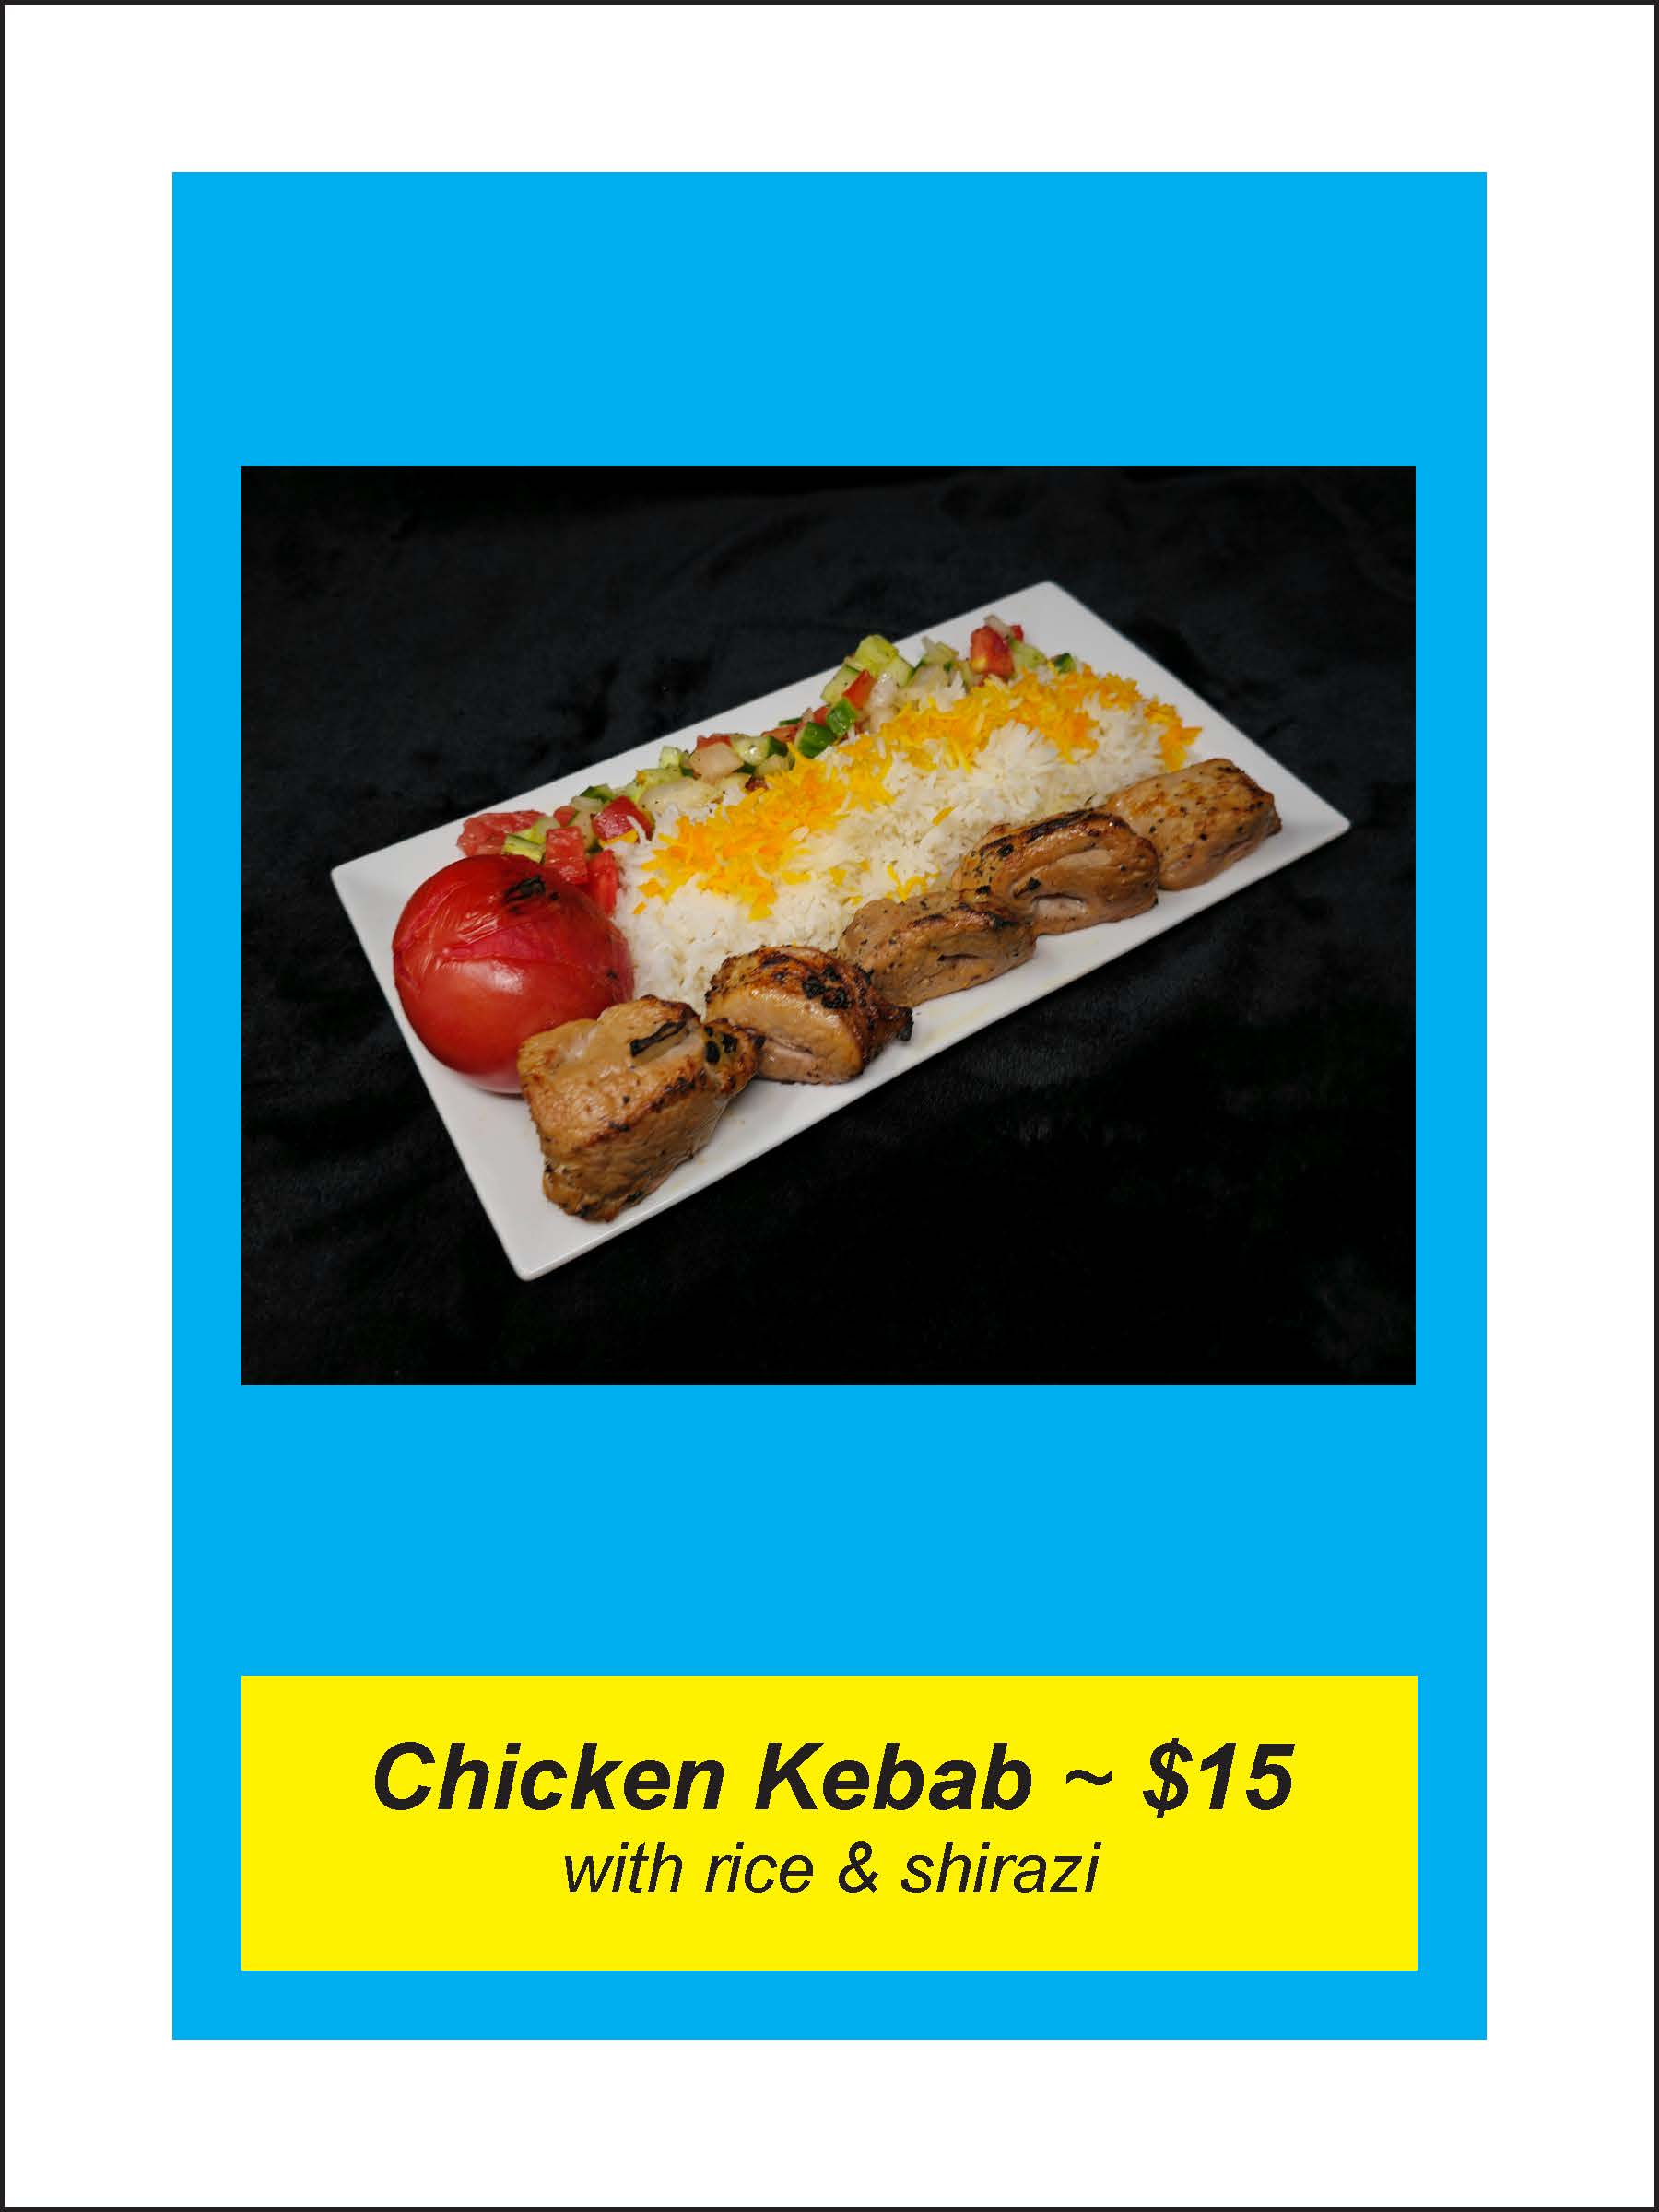 Plate of chicken kebabs served with rice, grilled tomato, and Shirazi salad. Text below reads "Chicken Kebab ~ $15 with rice & shirazi.